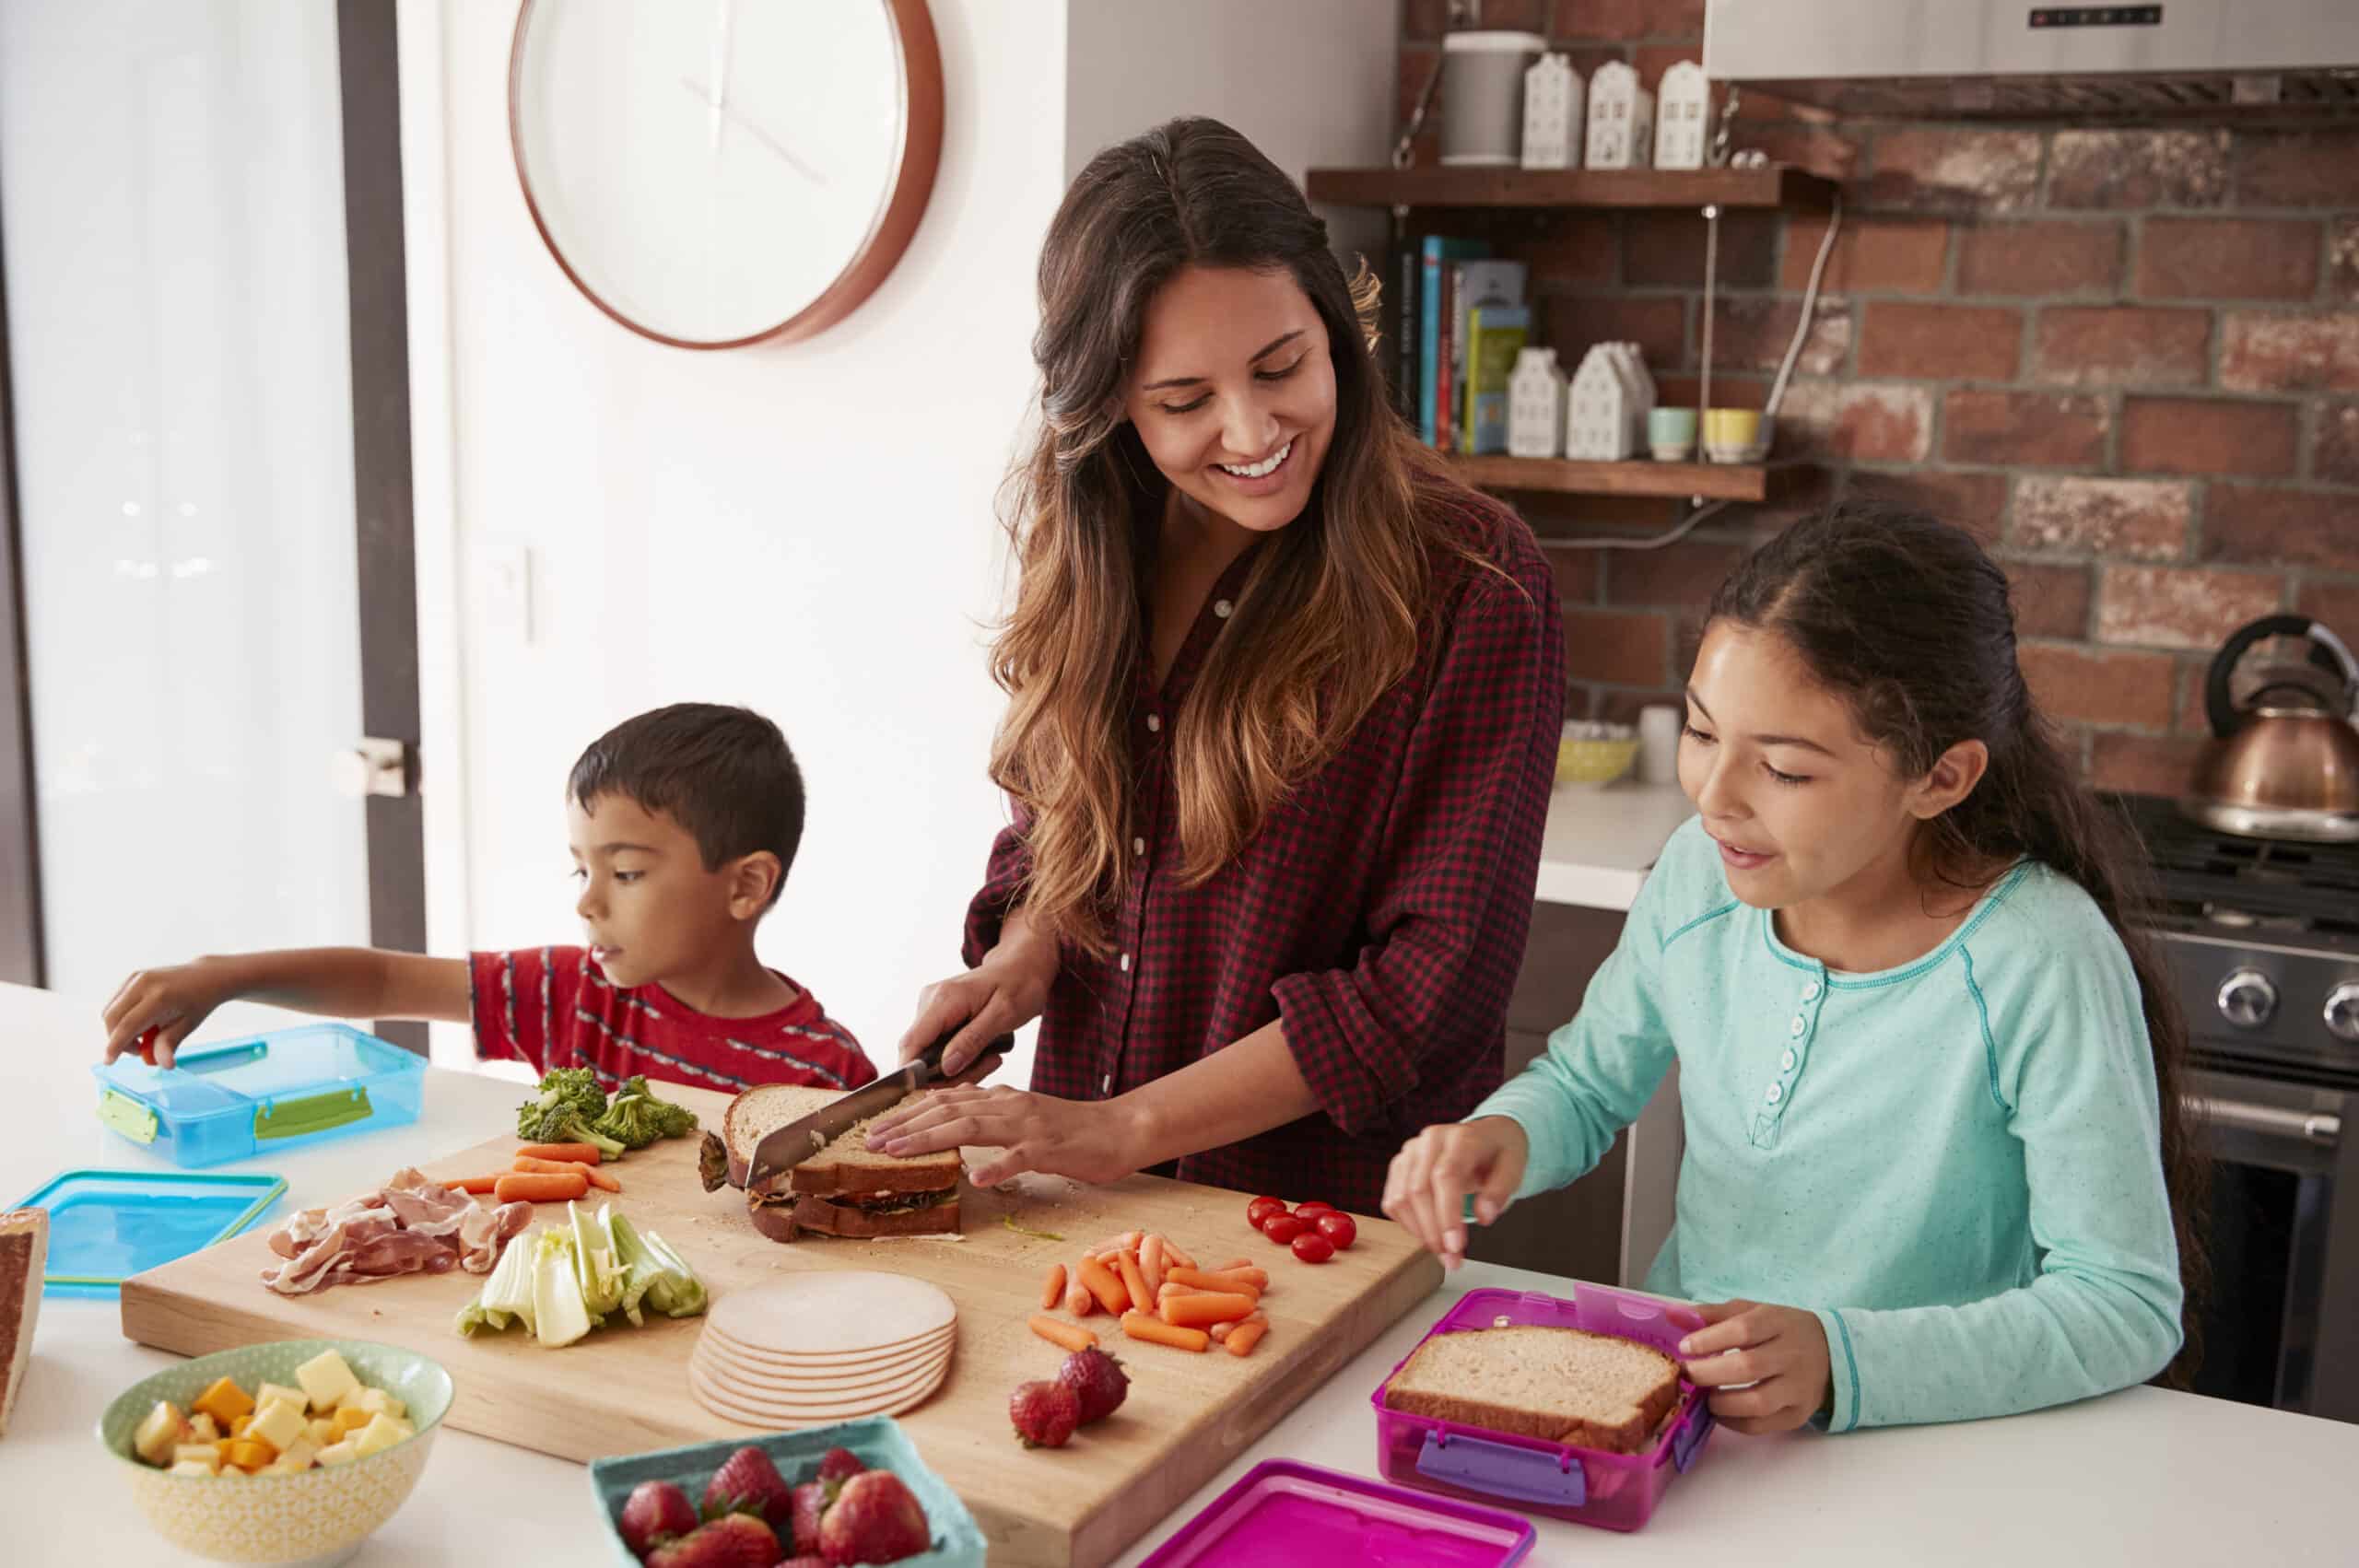 Two kids helping their mom make food with fresh fruits and veggies